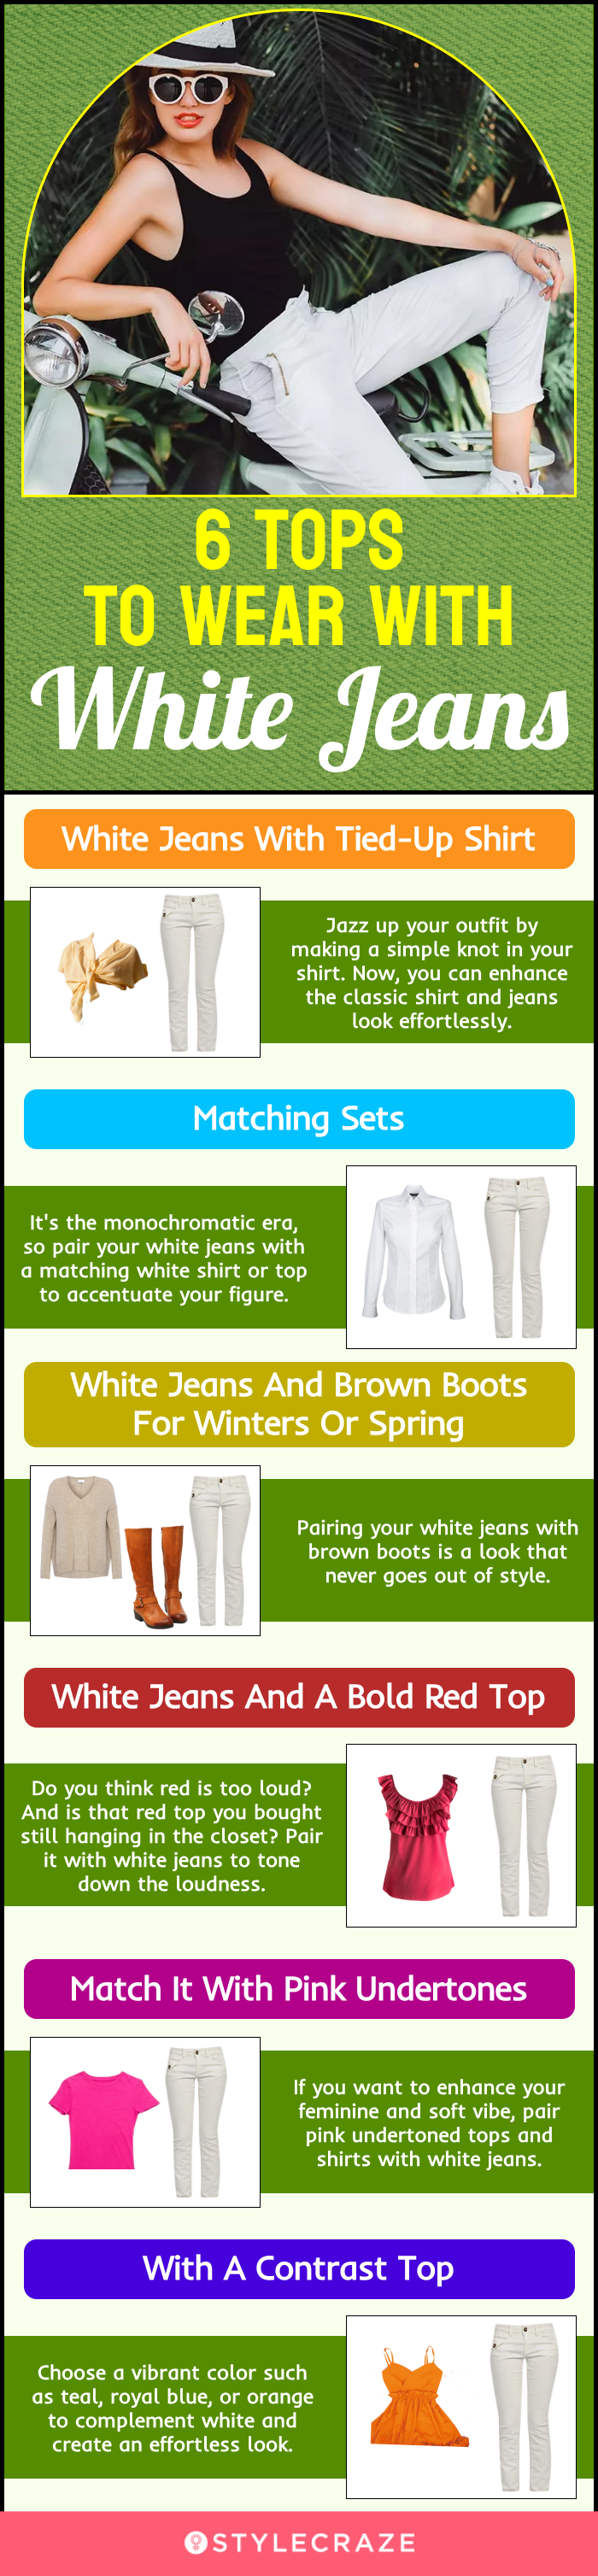 6 tops to wear with white jeans(infographic)